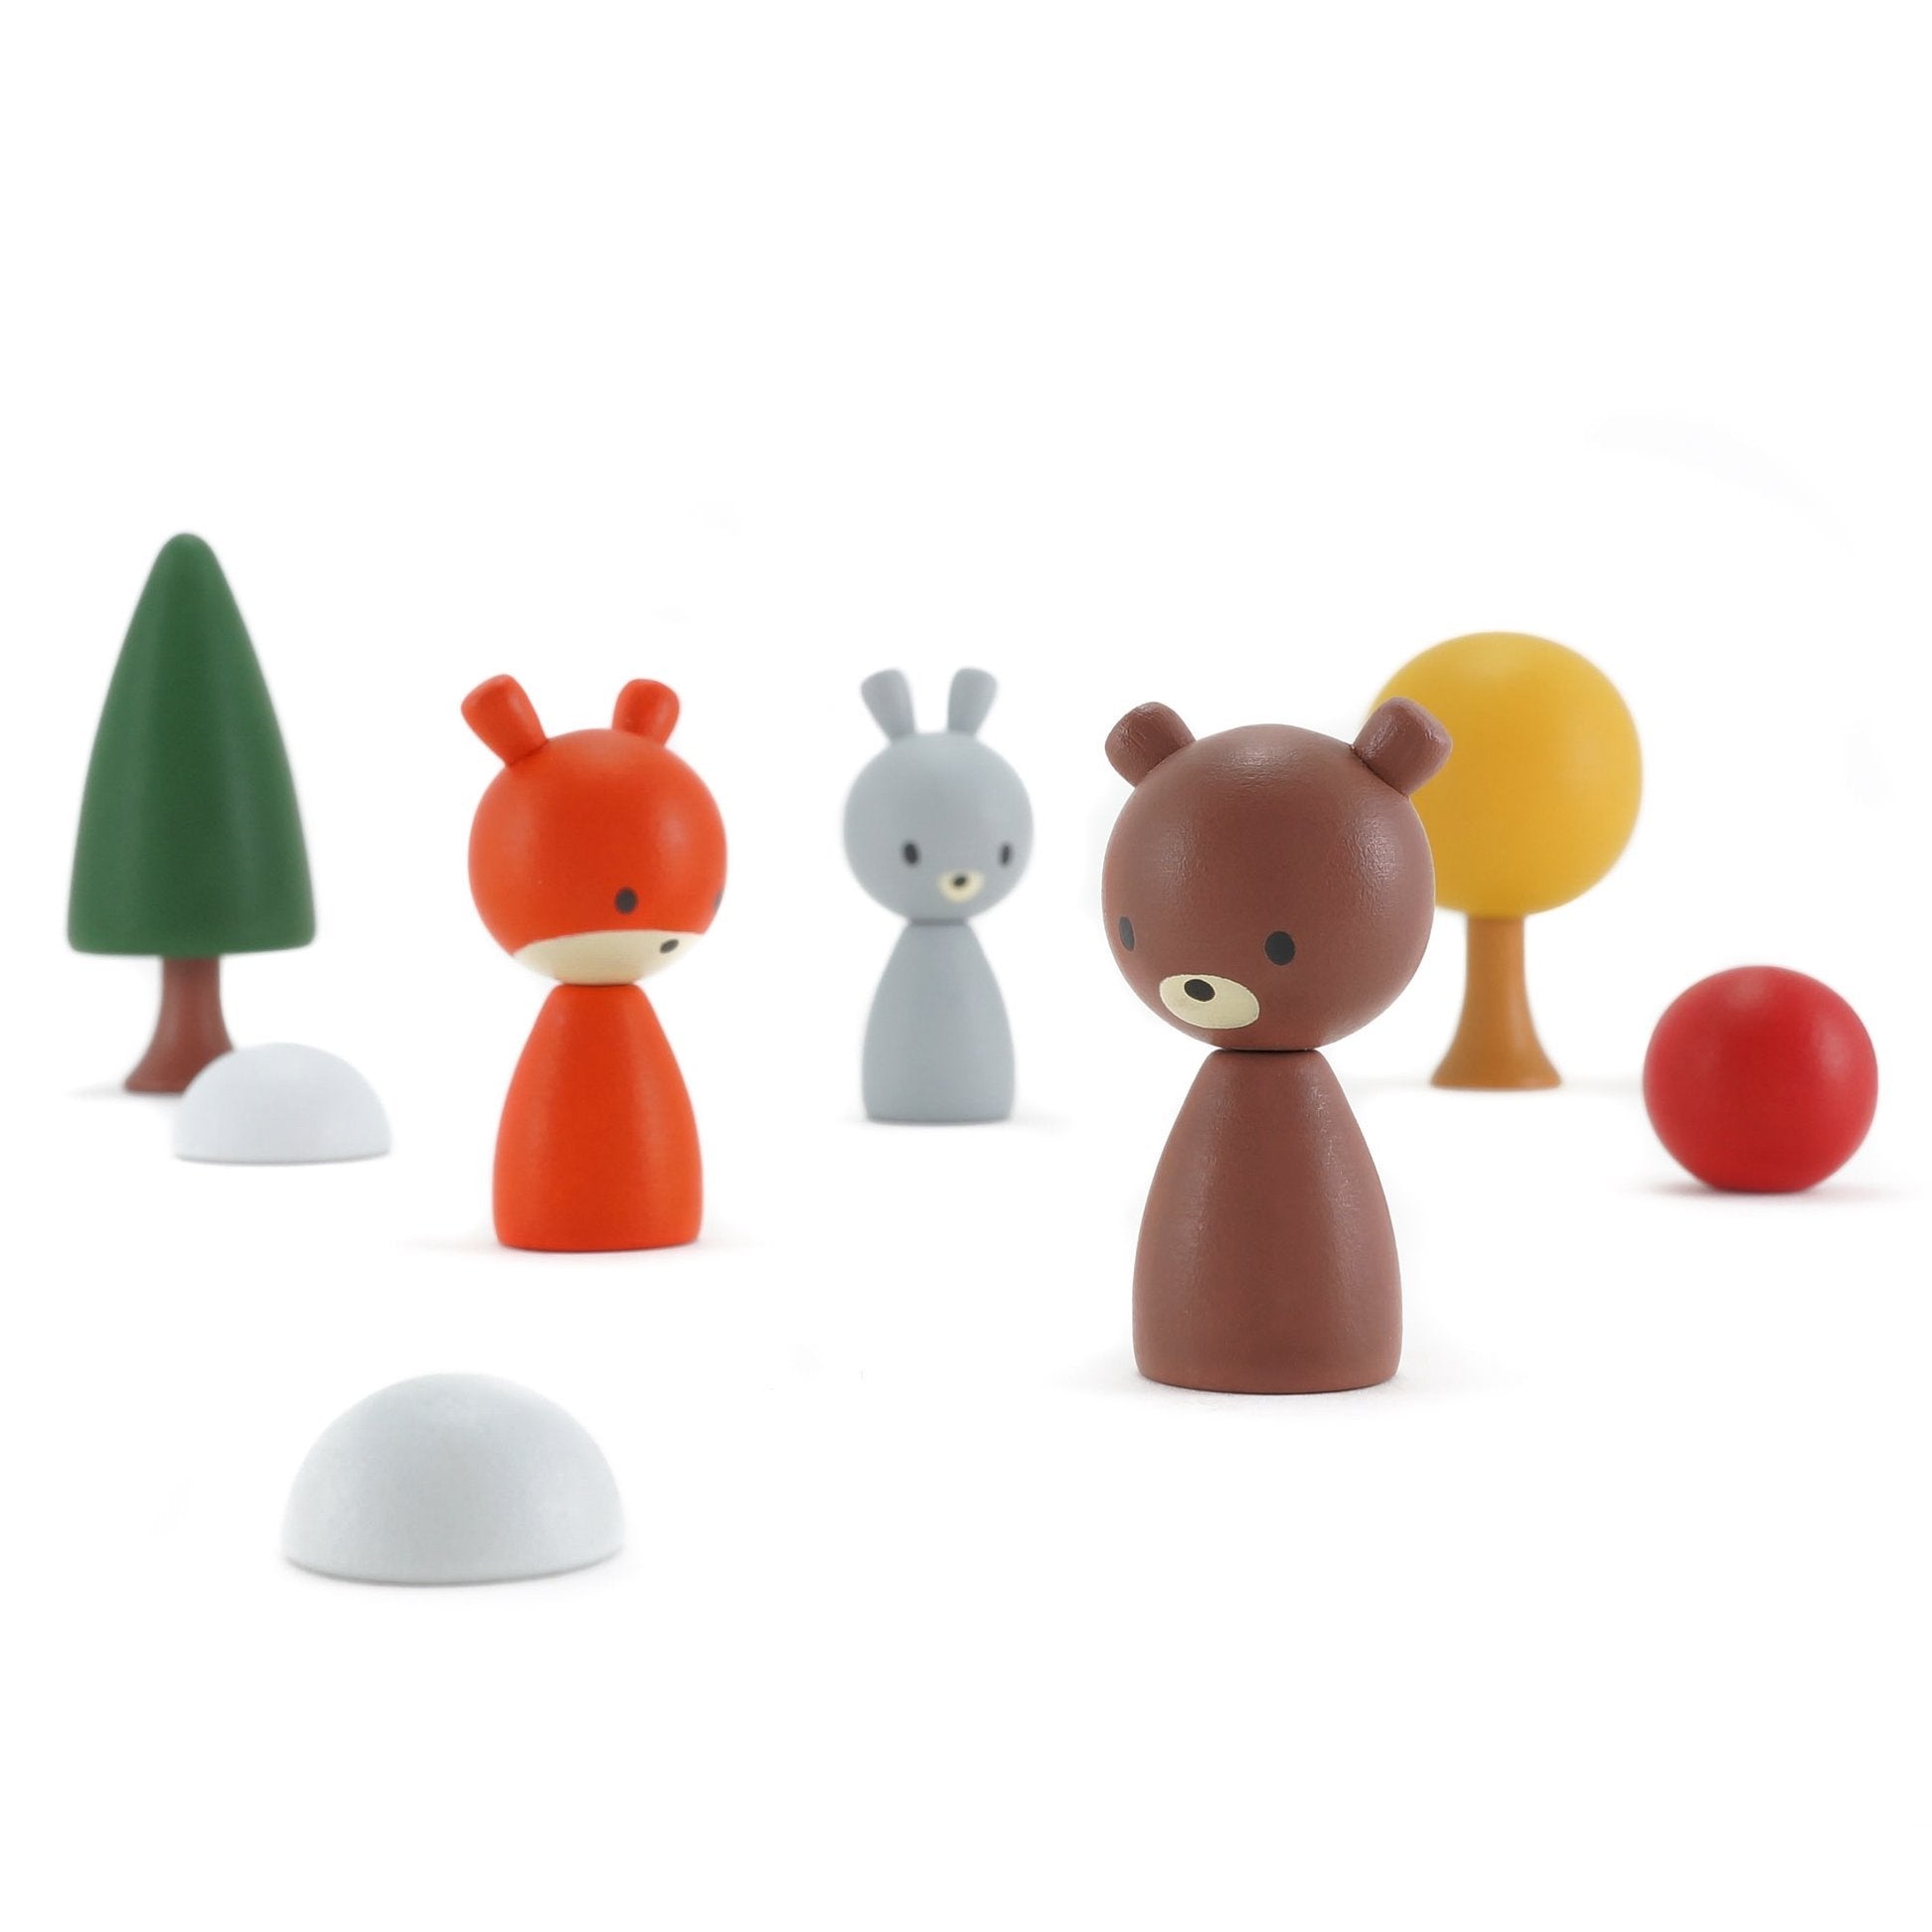 CLiCQUES Magnetic FAUNA - Robert, Ginger and Bunji - Wood Wood Toys Canada's Favourite Montessori Toy Store